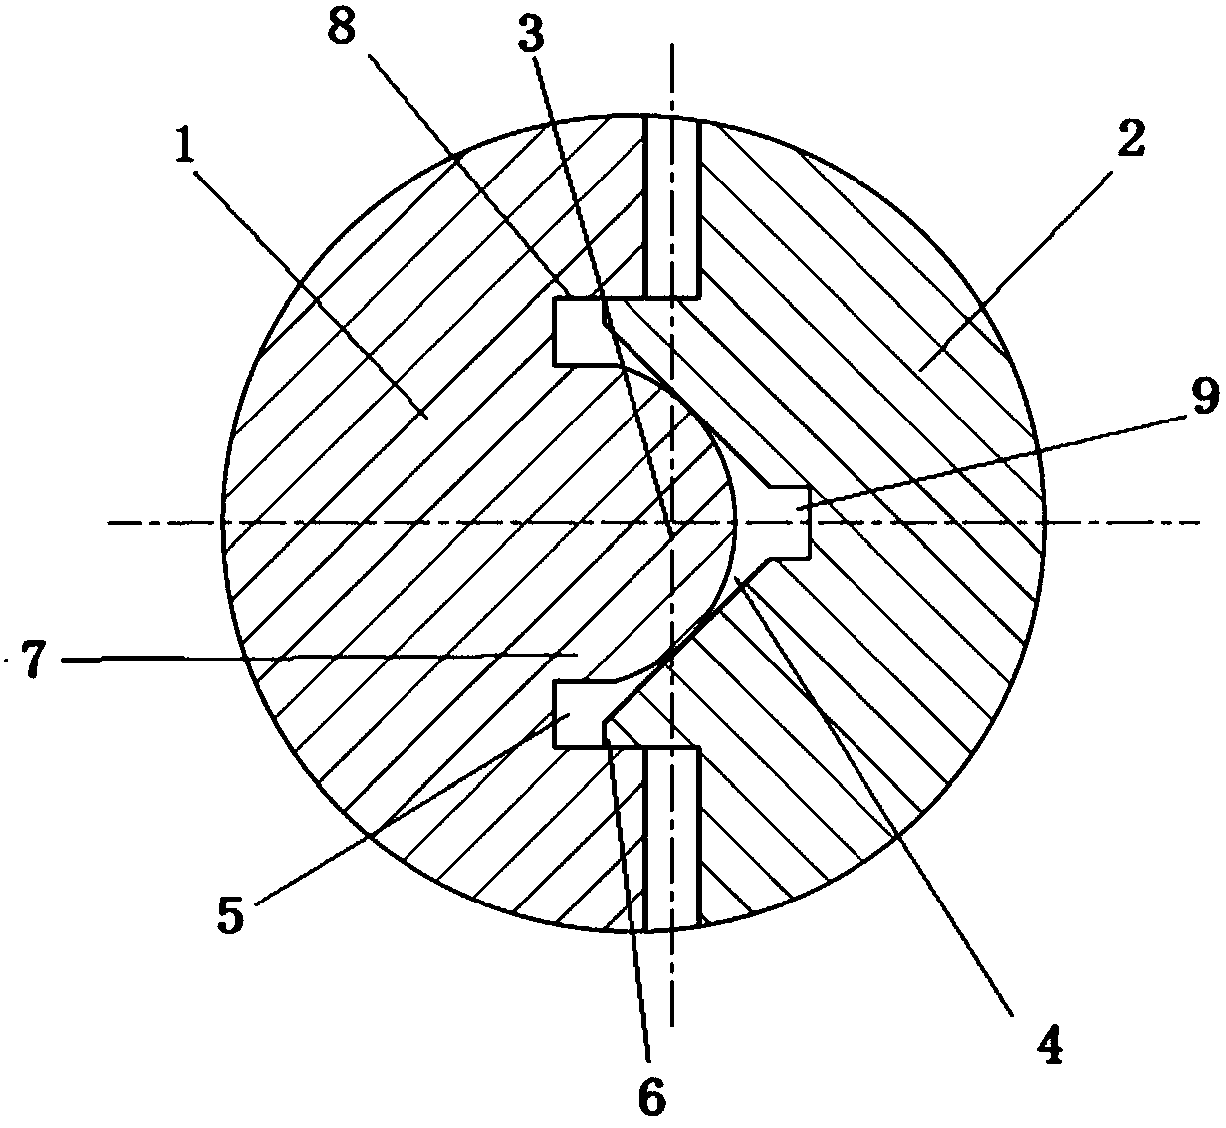 Wedge type double gate plate structure with V-shaped conical surface